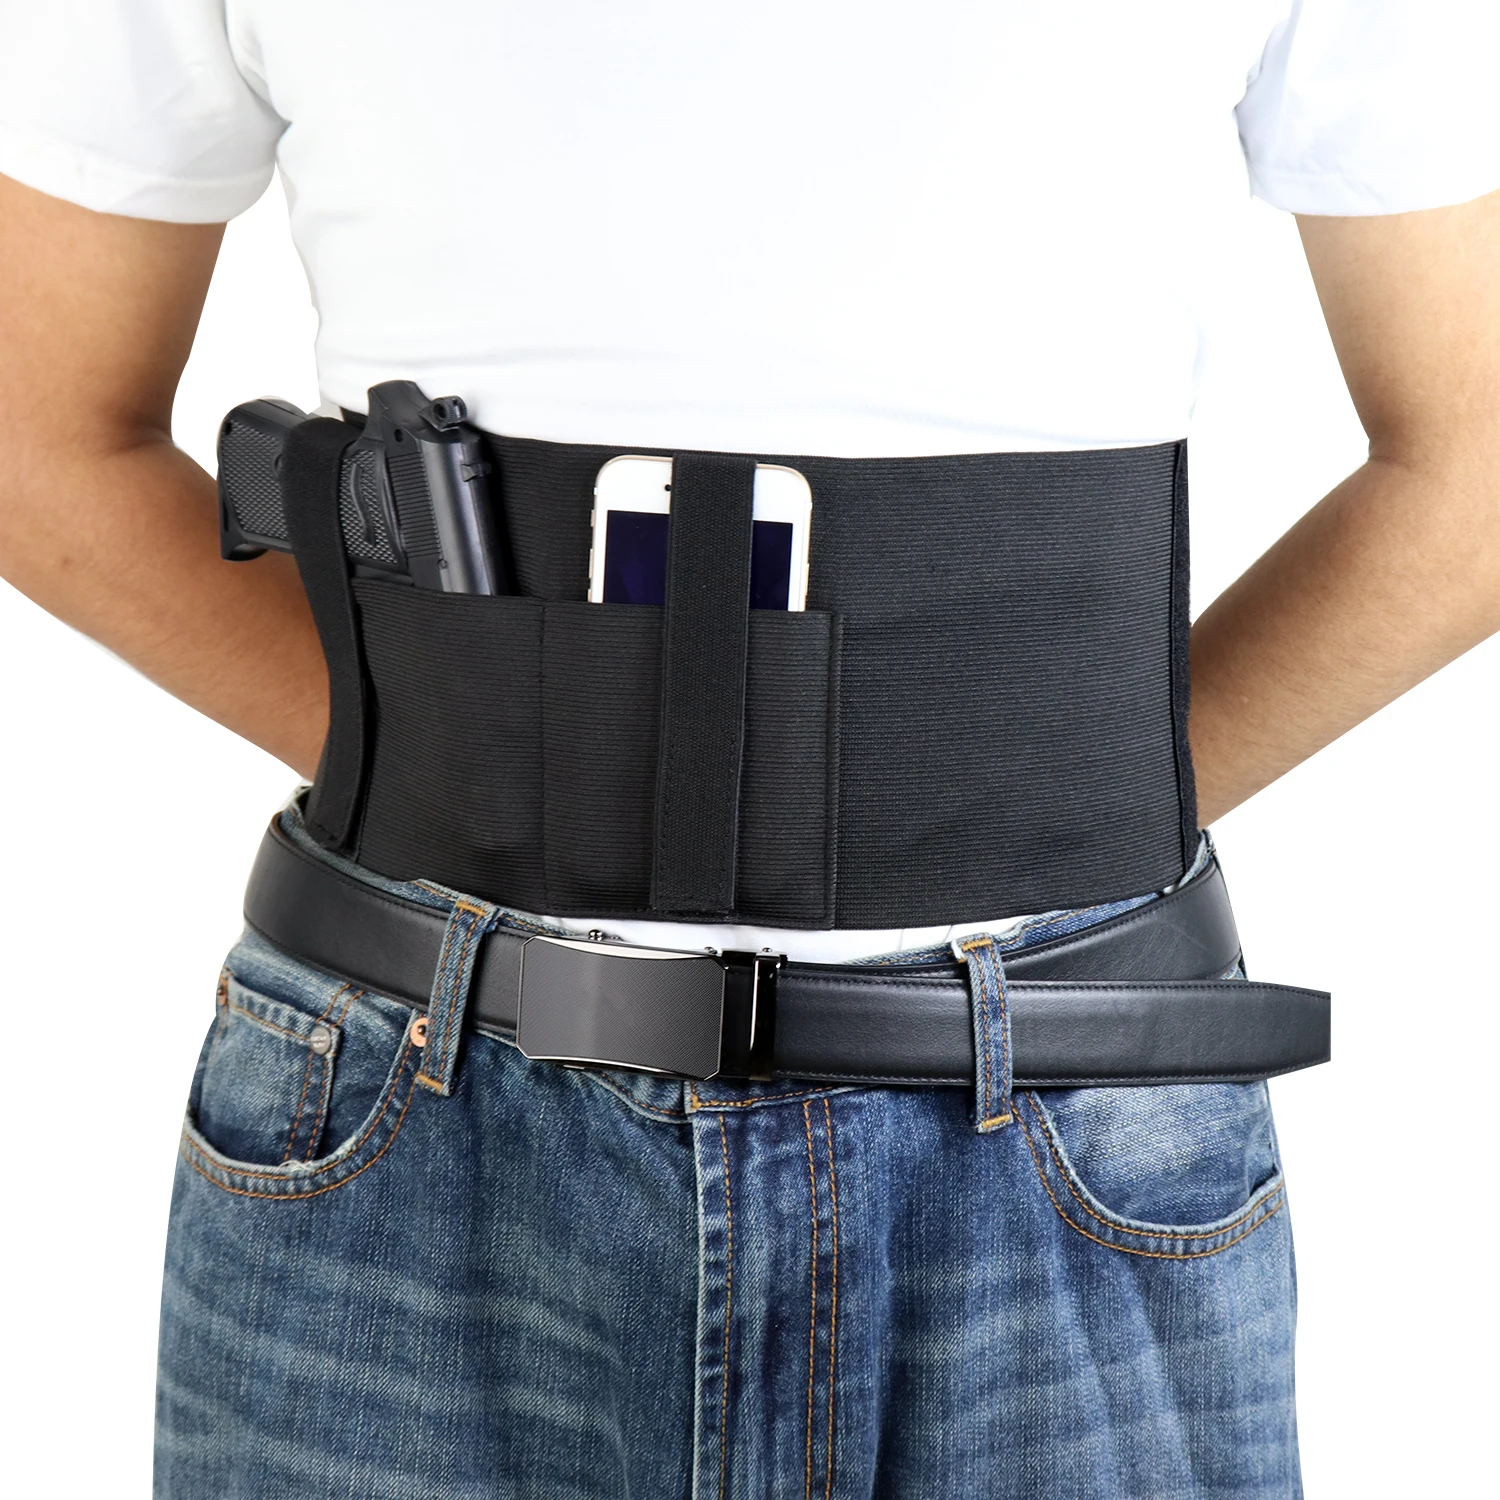 

Free sample Waist Neoprene Concealed belly band holsters kydex holster tactical, Black